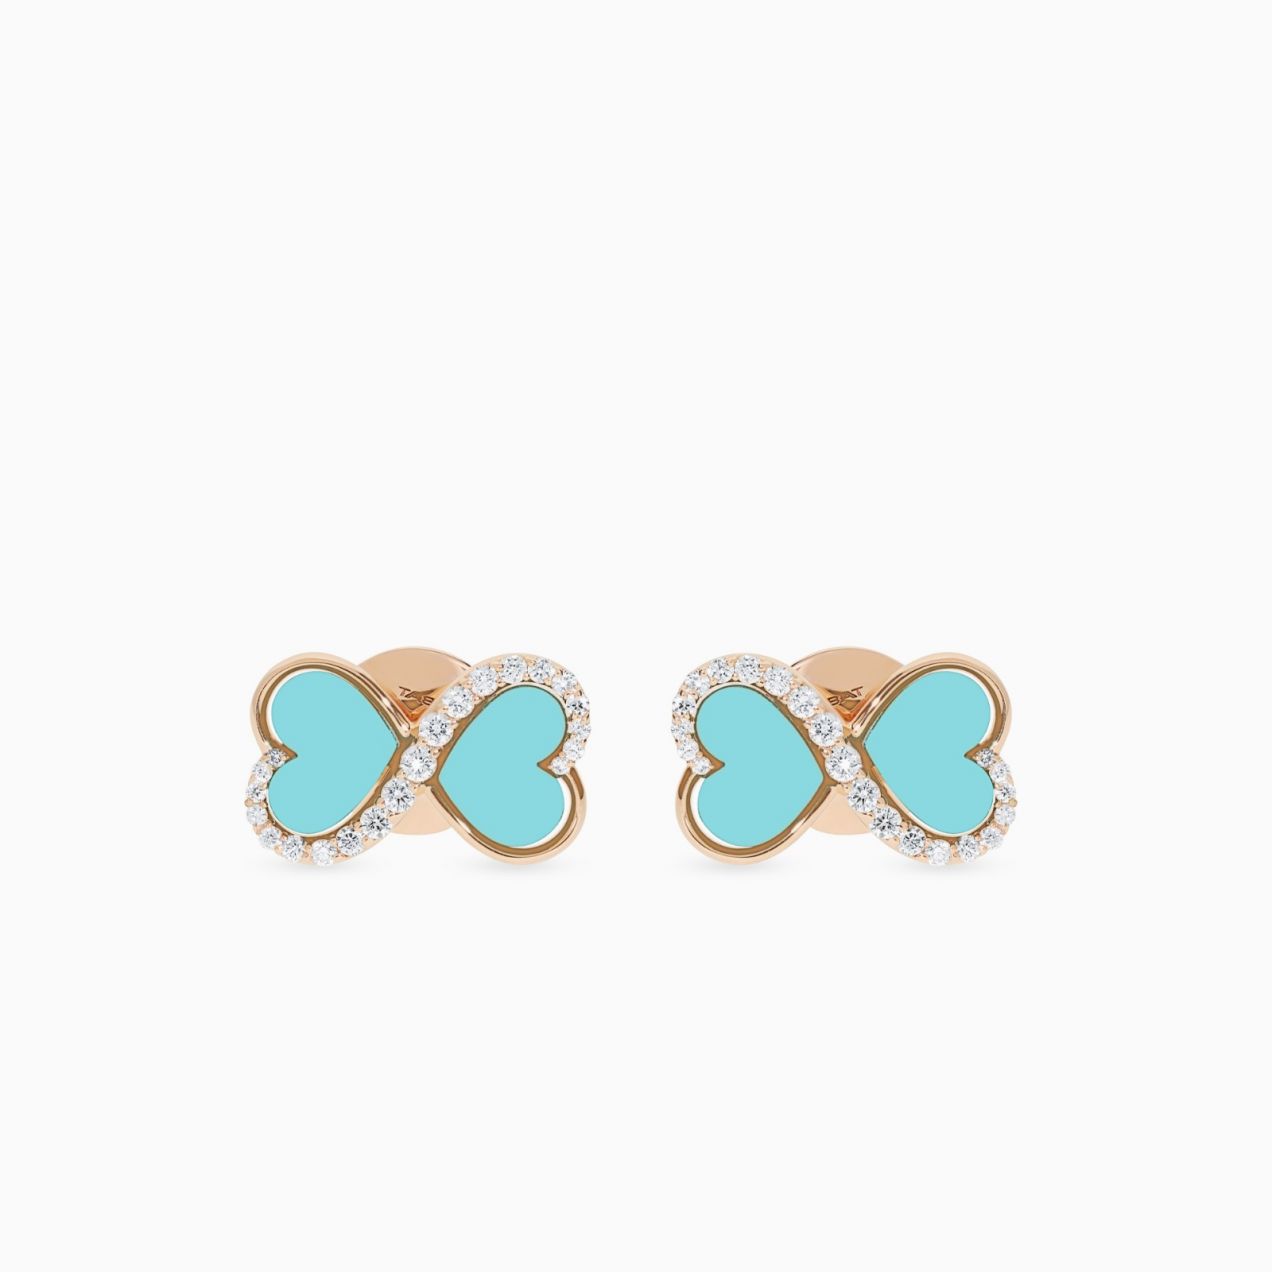 Rose gold button infinity symbol earrings with heart-cut turquoise and diamonds